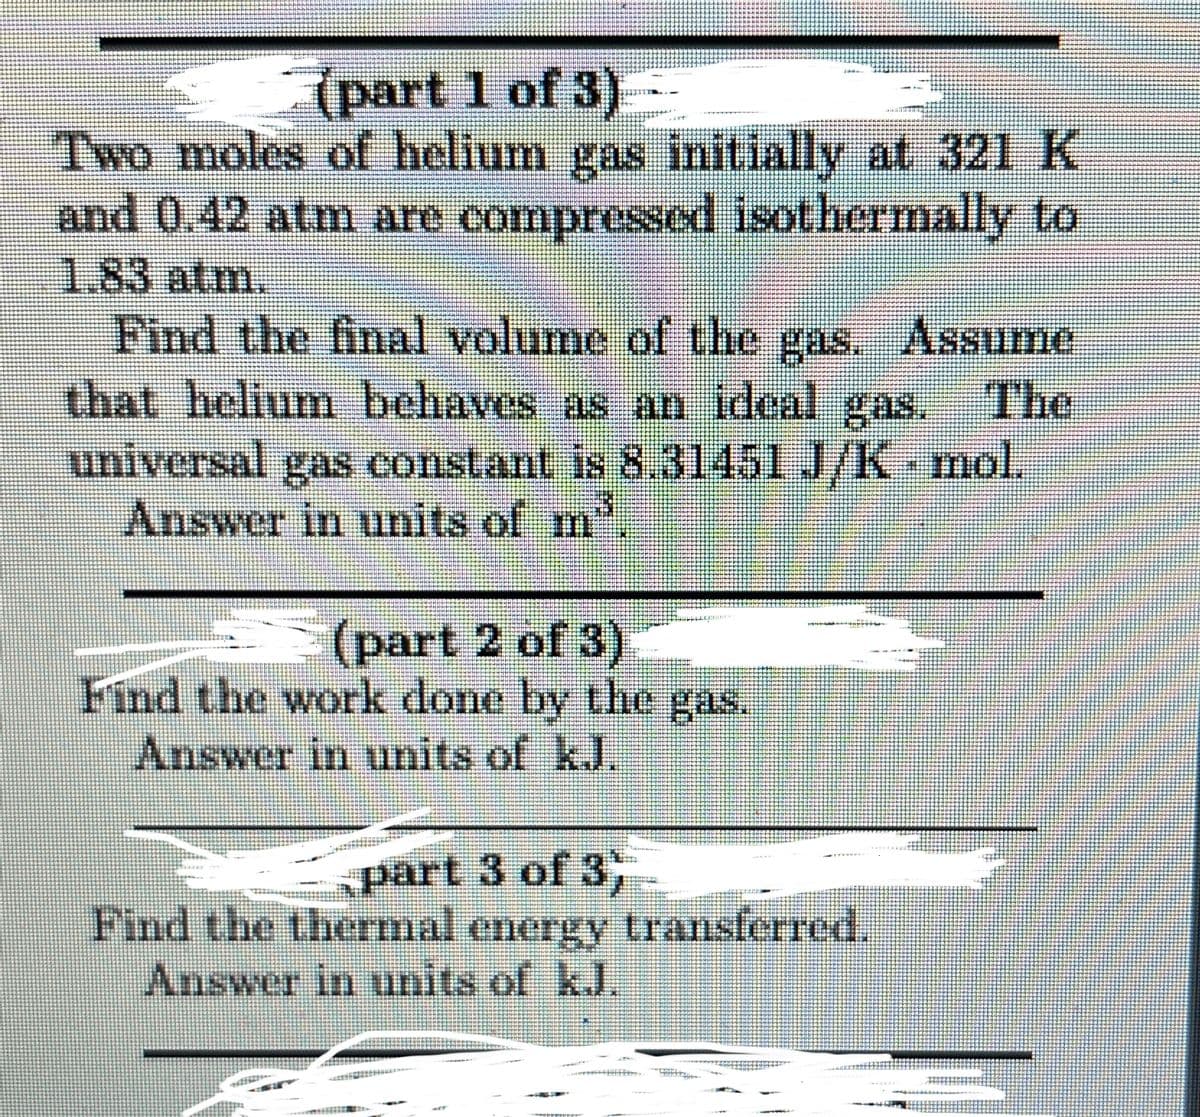 part 1 of 3)
Two moles of helium gas initially at 321 K
and 0.42 atm are compressed isothermally to
1.83 atm.
The
Find the final volume of the gas. Assume
that helium behaves as an ideal gas.
universal gas constant is 8.31451 J/K - mol.
Answer in units of m
(part 2 of 3)
Find the work done by the gas.
Answer in units of kJ.
part 3 of 3
Find the thermal energy transferred.
Answer in units of k.J.